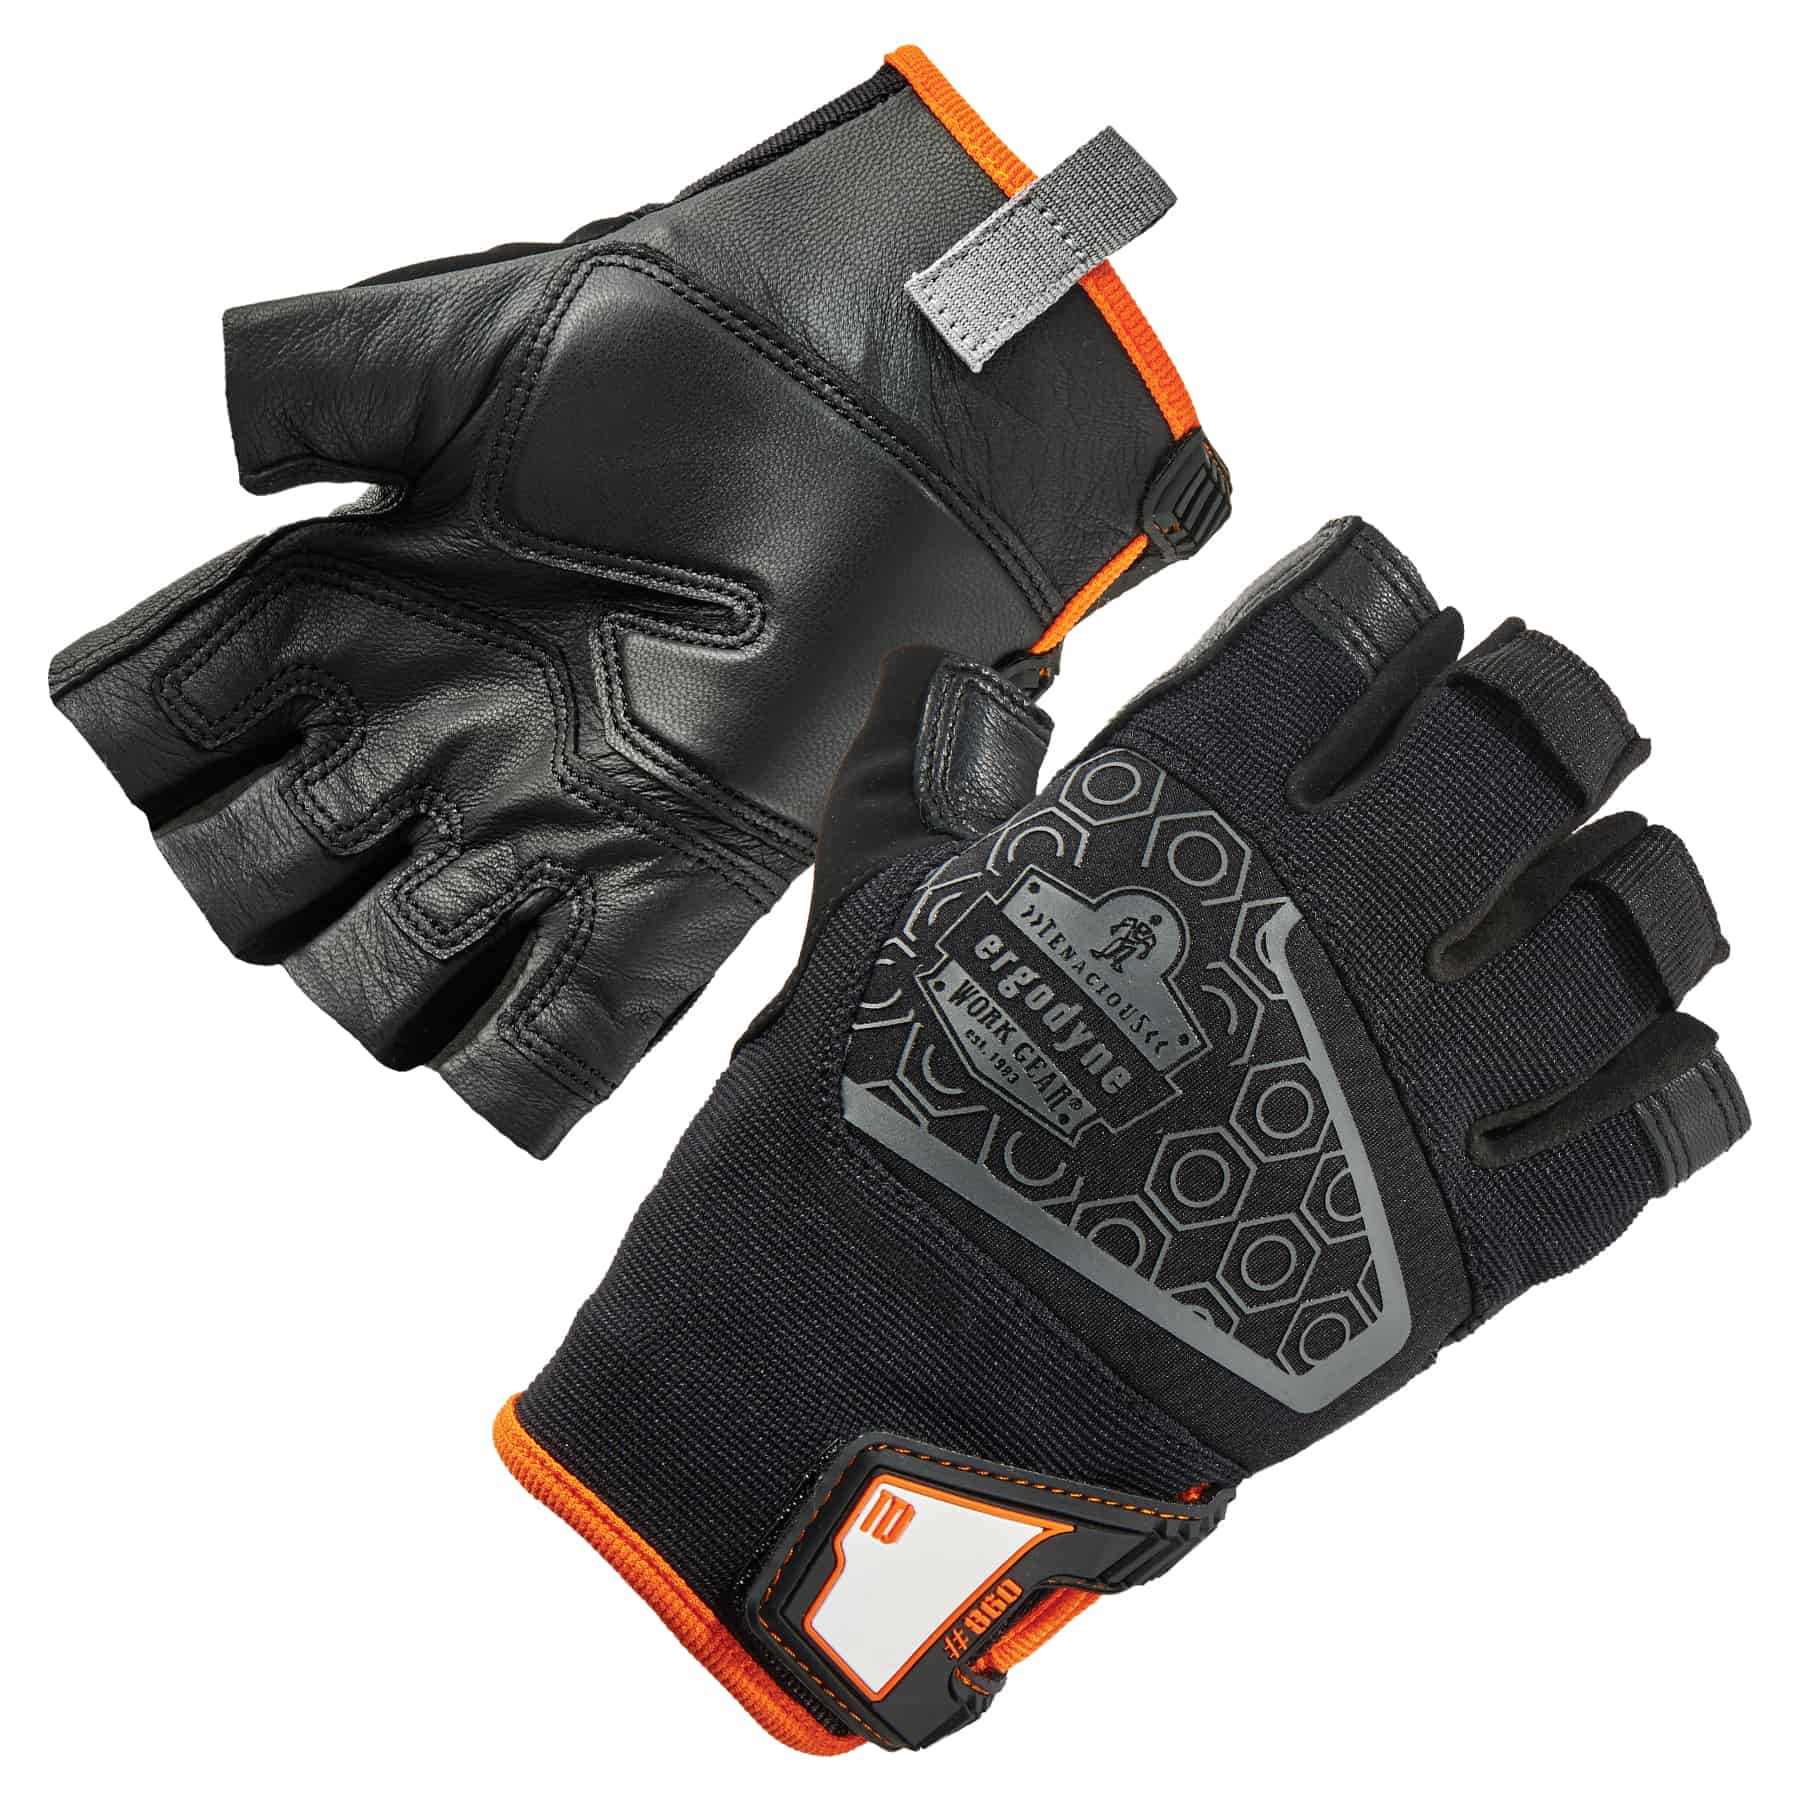 https://www.ergodyne.com/sites/default/files/product-images/17282-860-heavy-lifting-utility-gloves-paired.jpg